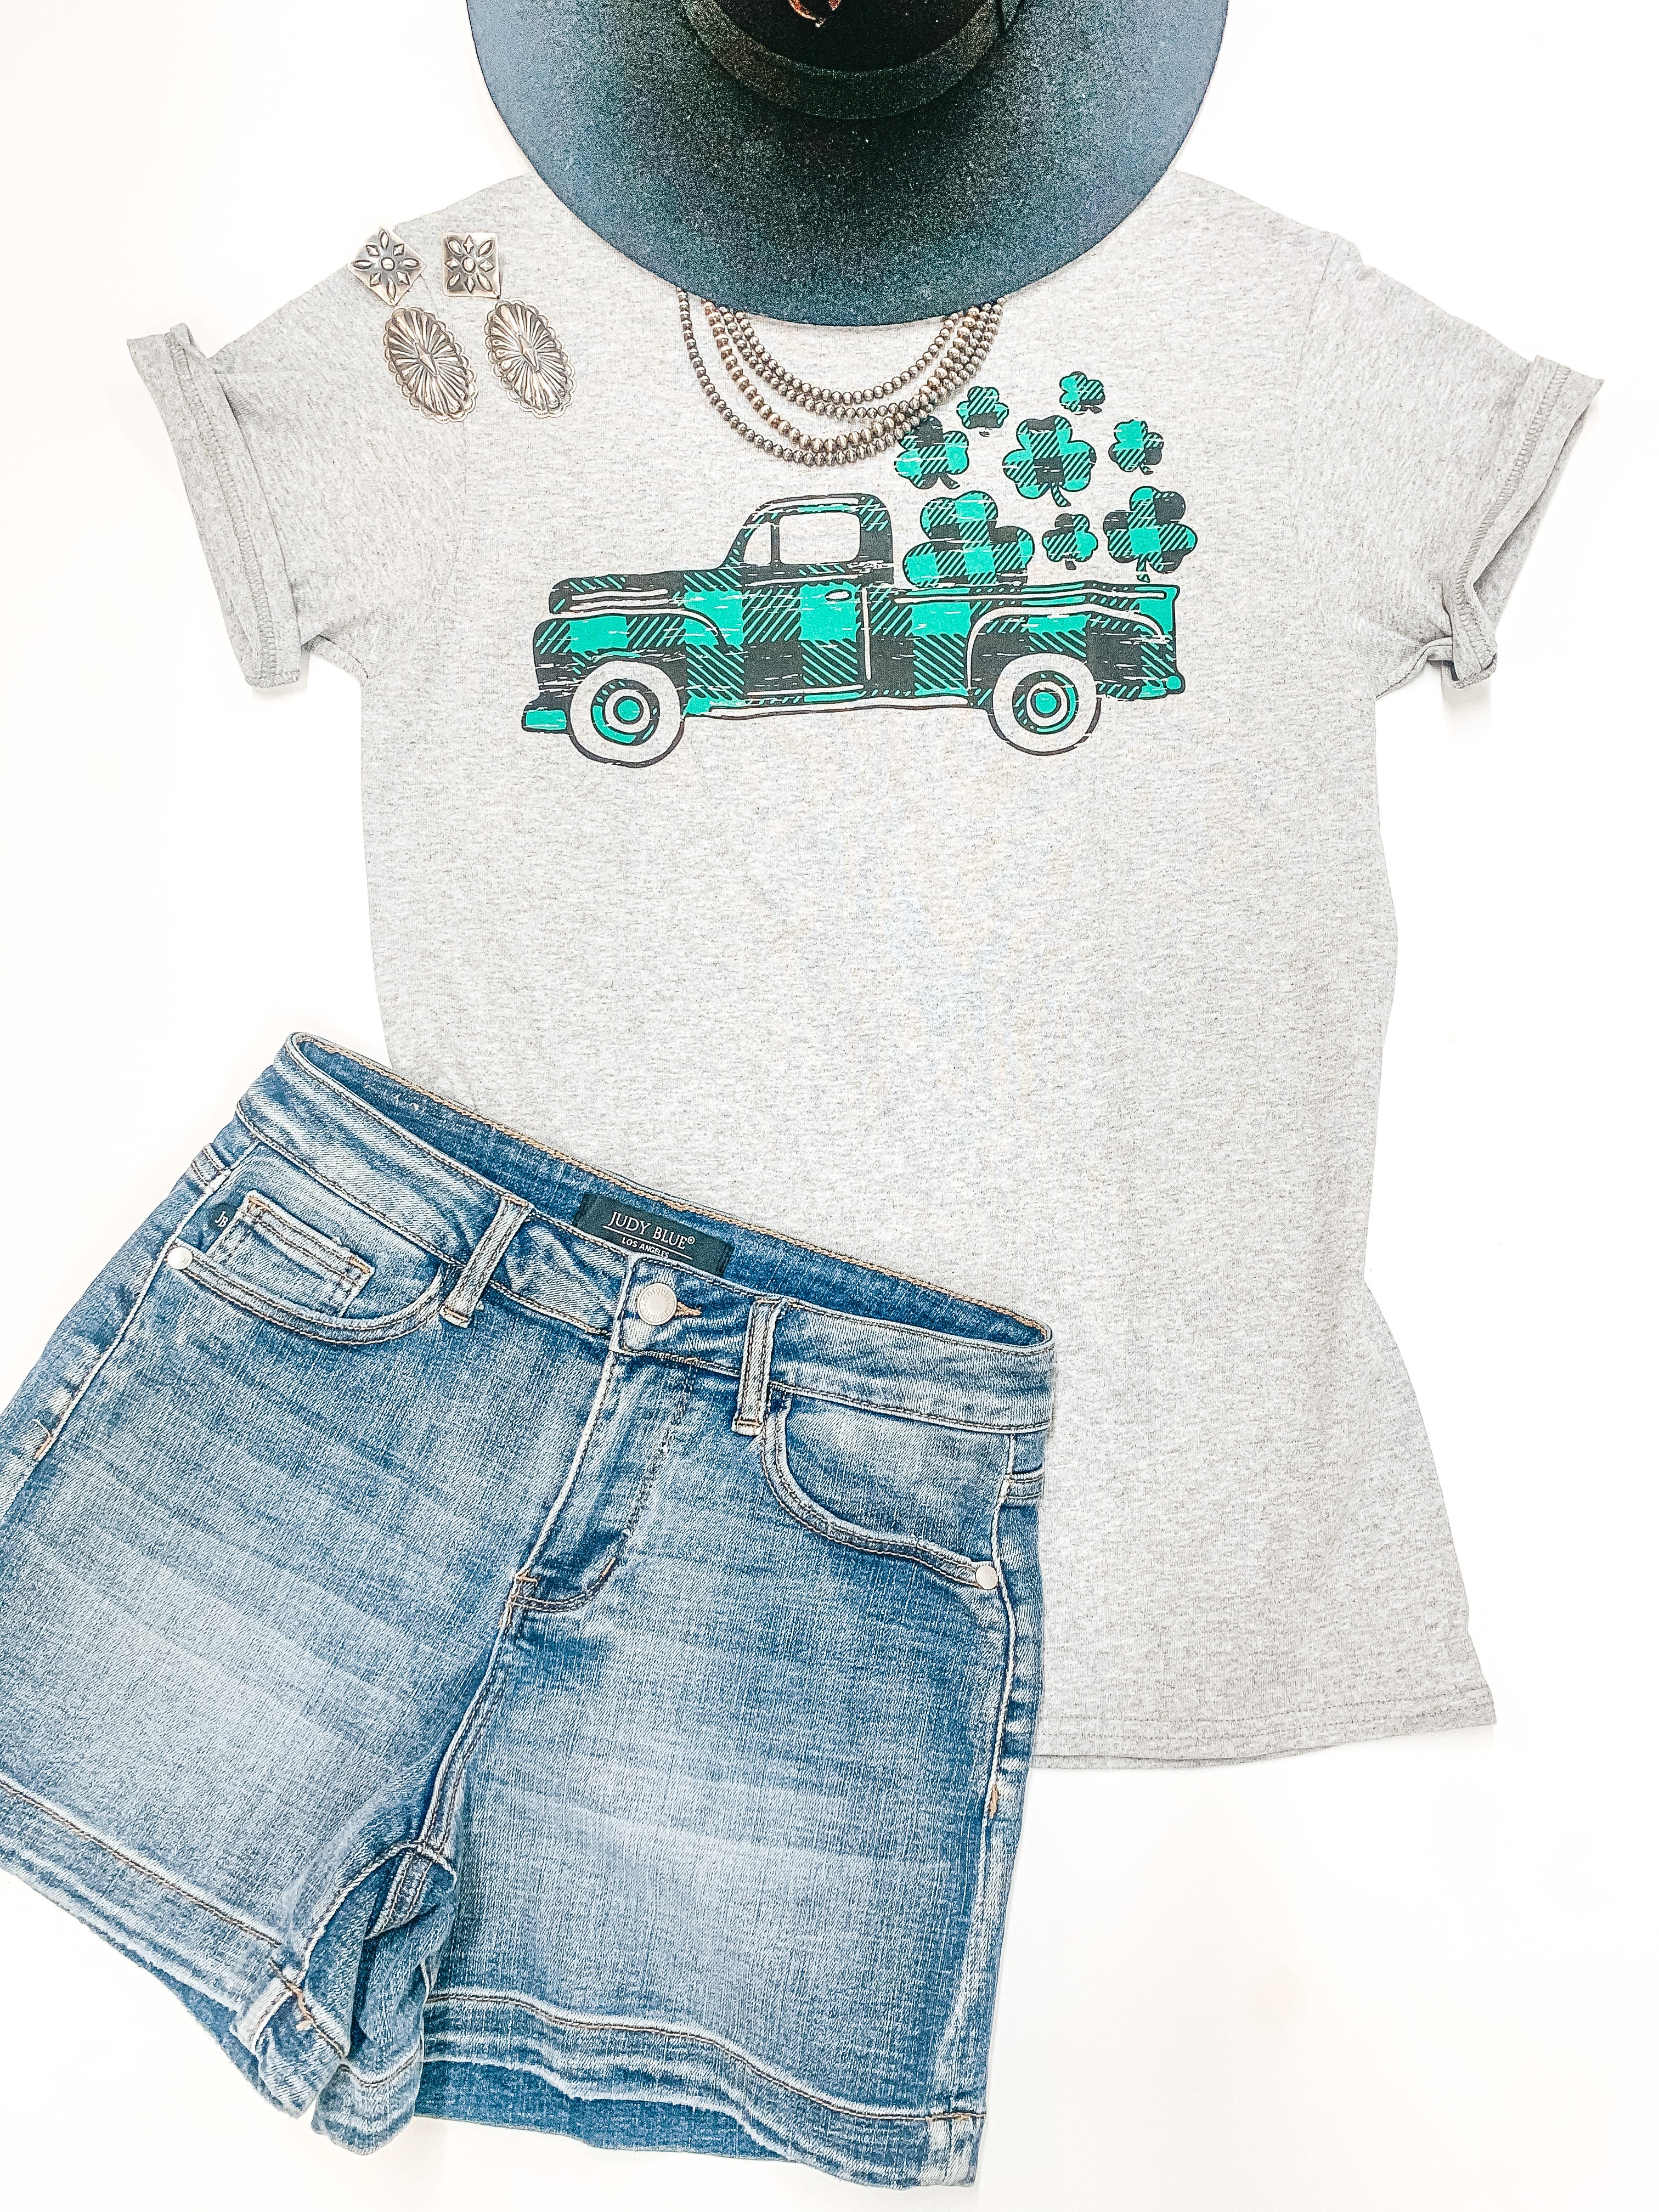 Take My Luck For A Ride Buffalo Plaid Pickup Truck with Clovers Graphic Tee in Heather Grey - Giddy Up Glamour Boutique